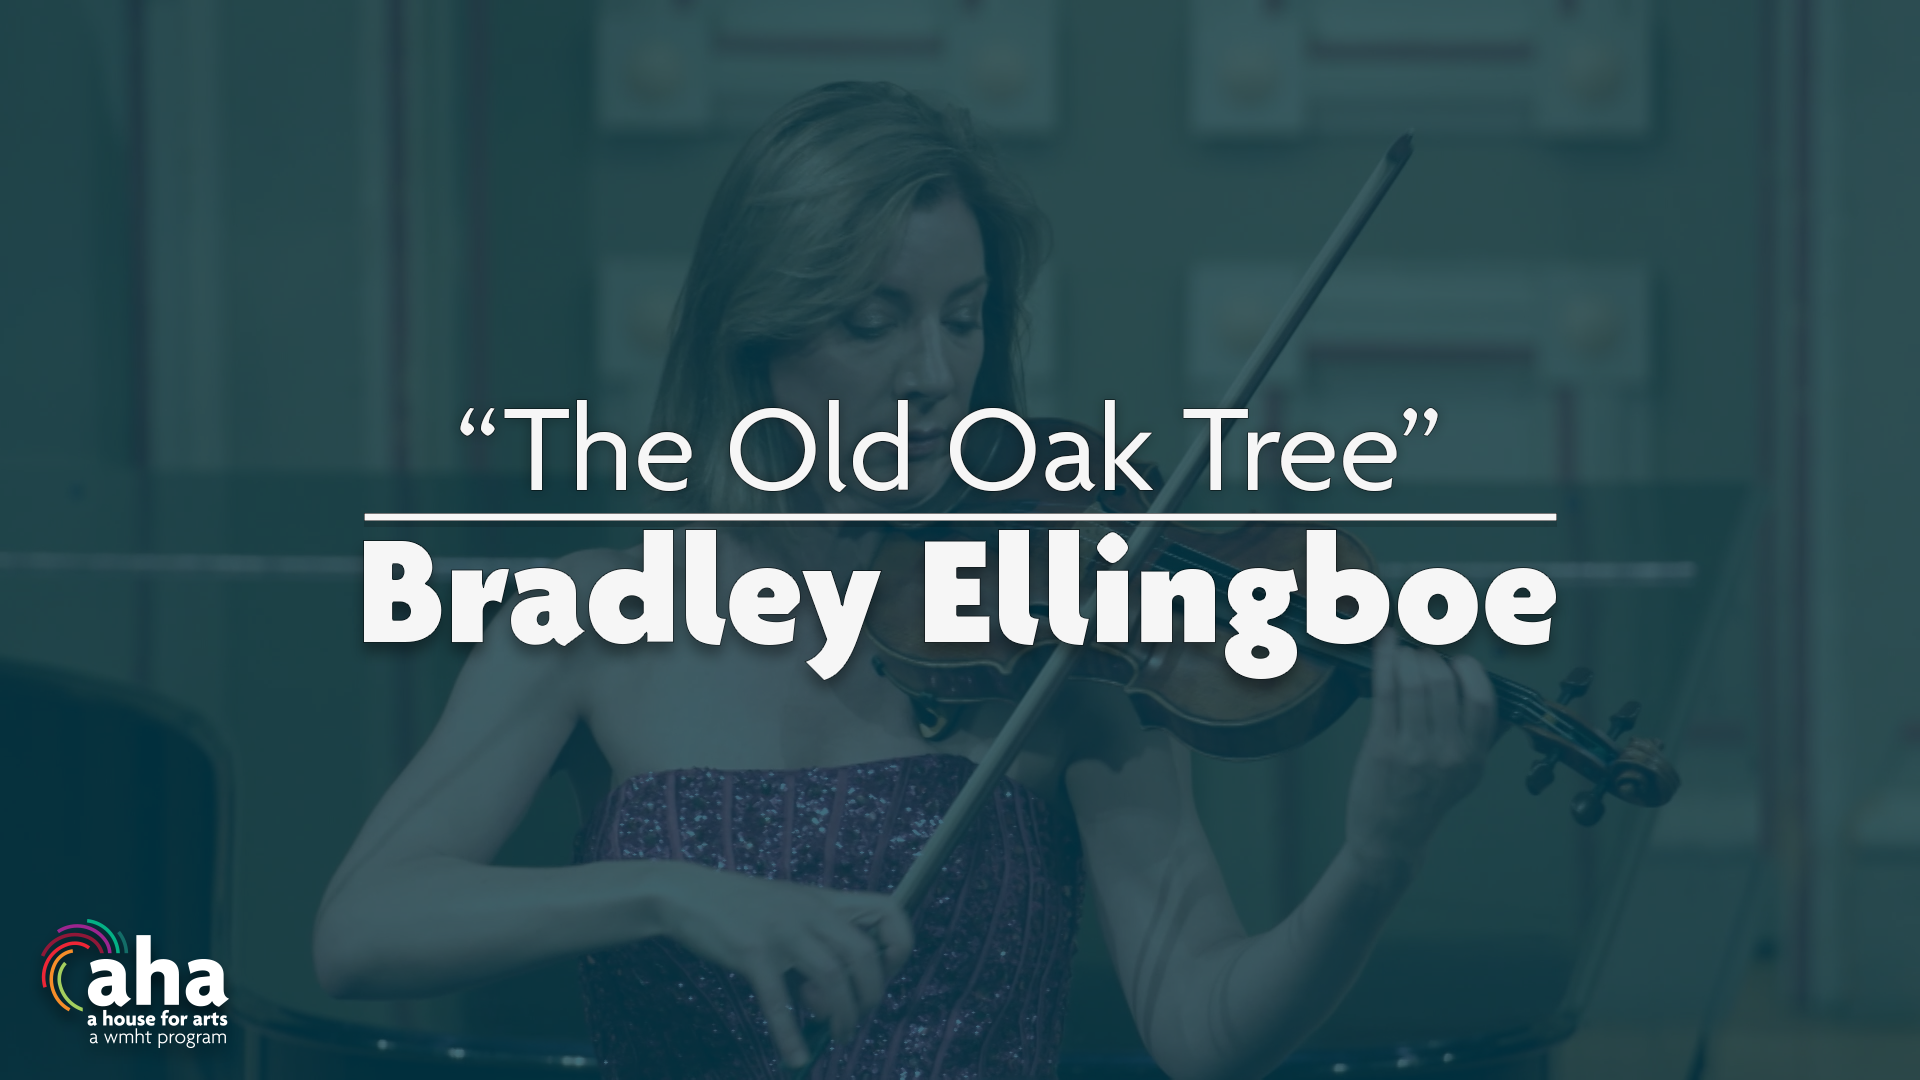 Albany Pro Musica and Elizabeth Pitcairn "The Old Oak Tree"